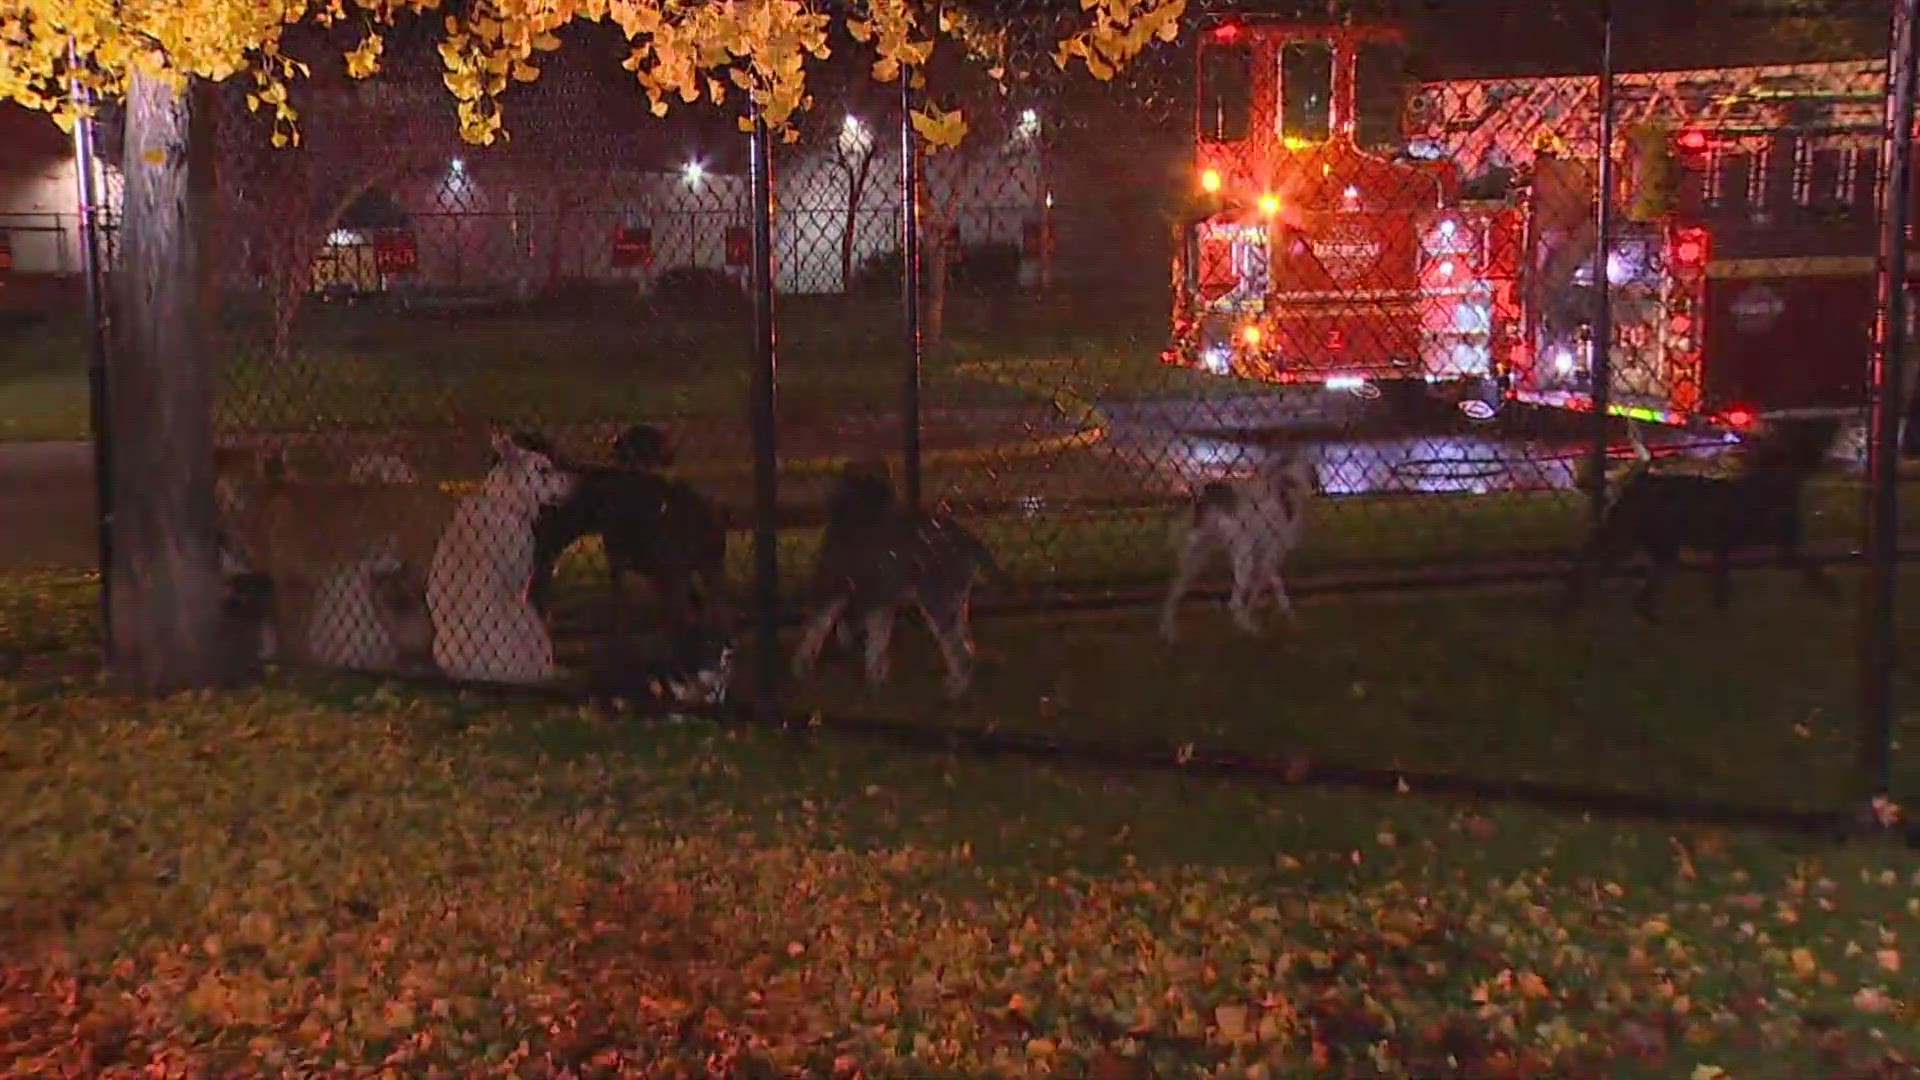 The incident happened at the Dog Resort on Industrial Way in Seattle's SODO neighborhood.